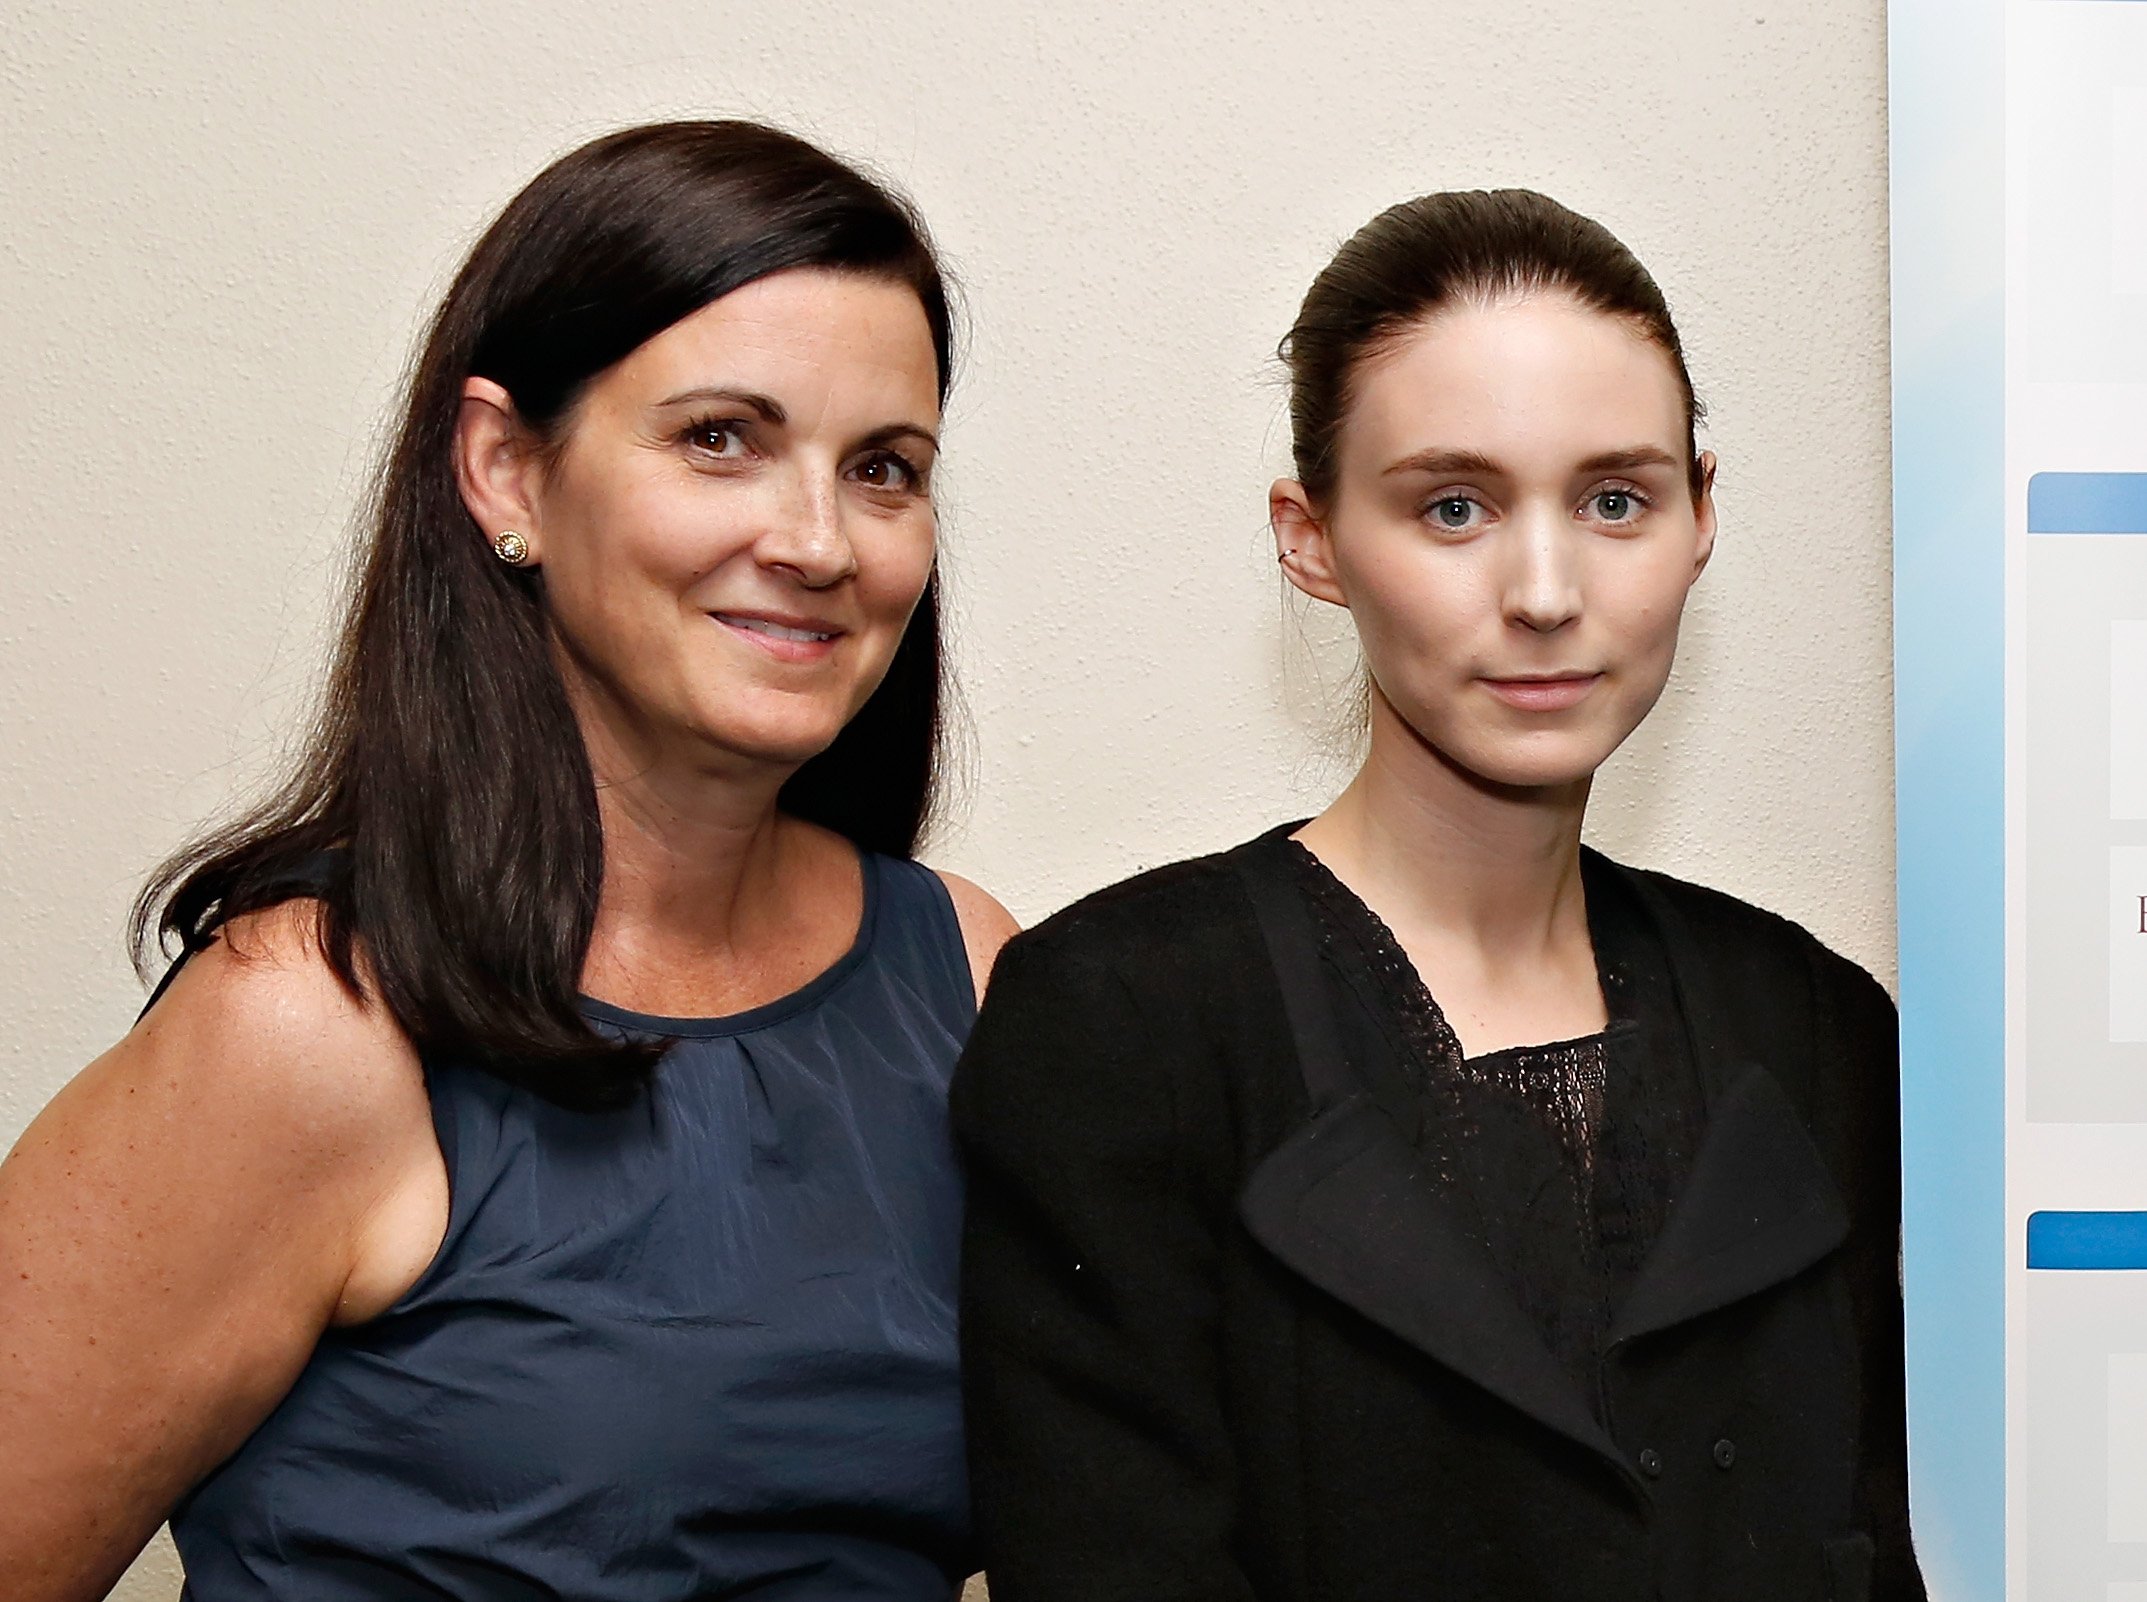 Philanthropist Kathleen Rooney Mara and her daughter actress Rooney Mara attend the Social Innovation Summit on May 30, 2013, in New York City. | Source: Getty Images